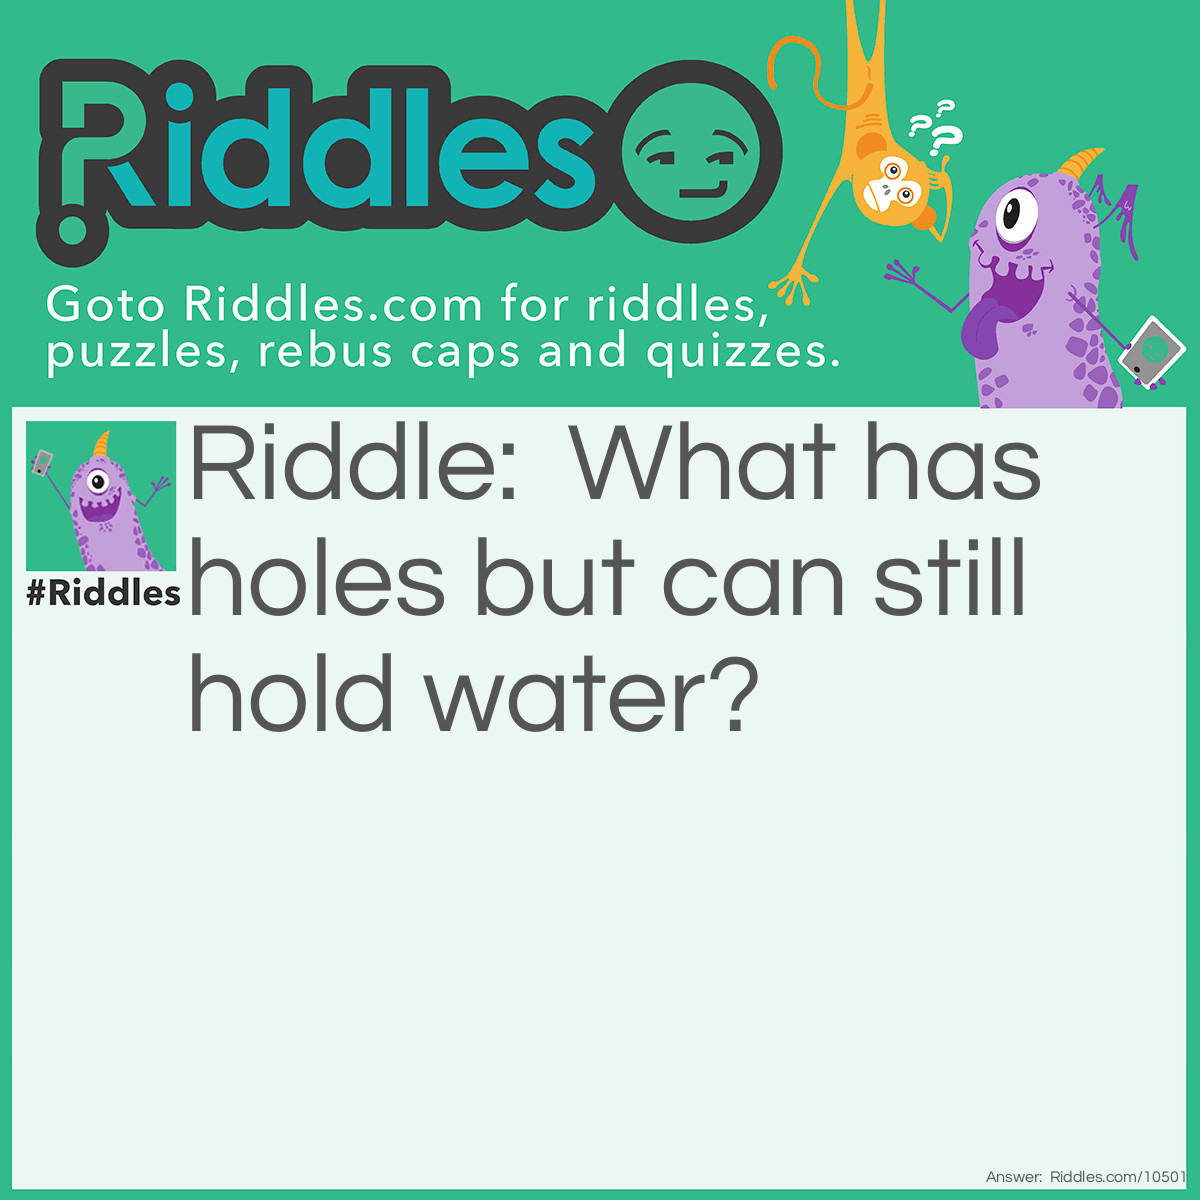 Riddle: What has holes but can still hold water? Answer: An easy one!? The answer is SPONGE! Isn't that easy, my friend?